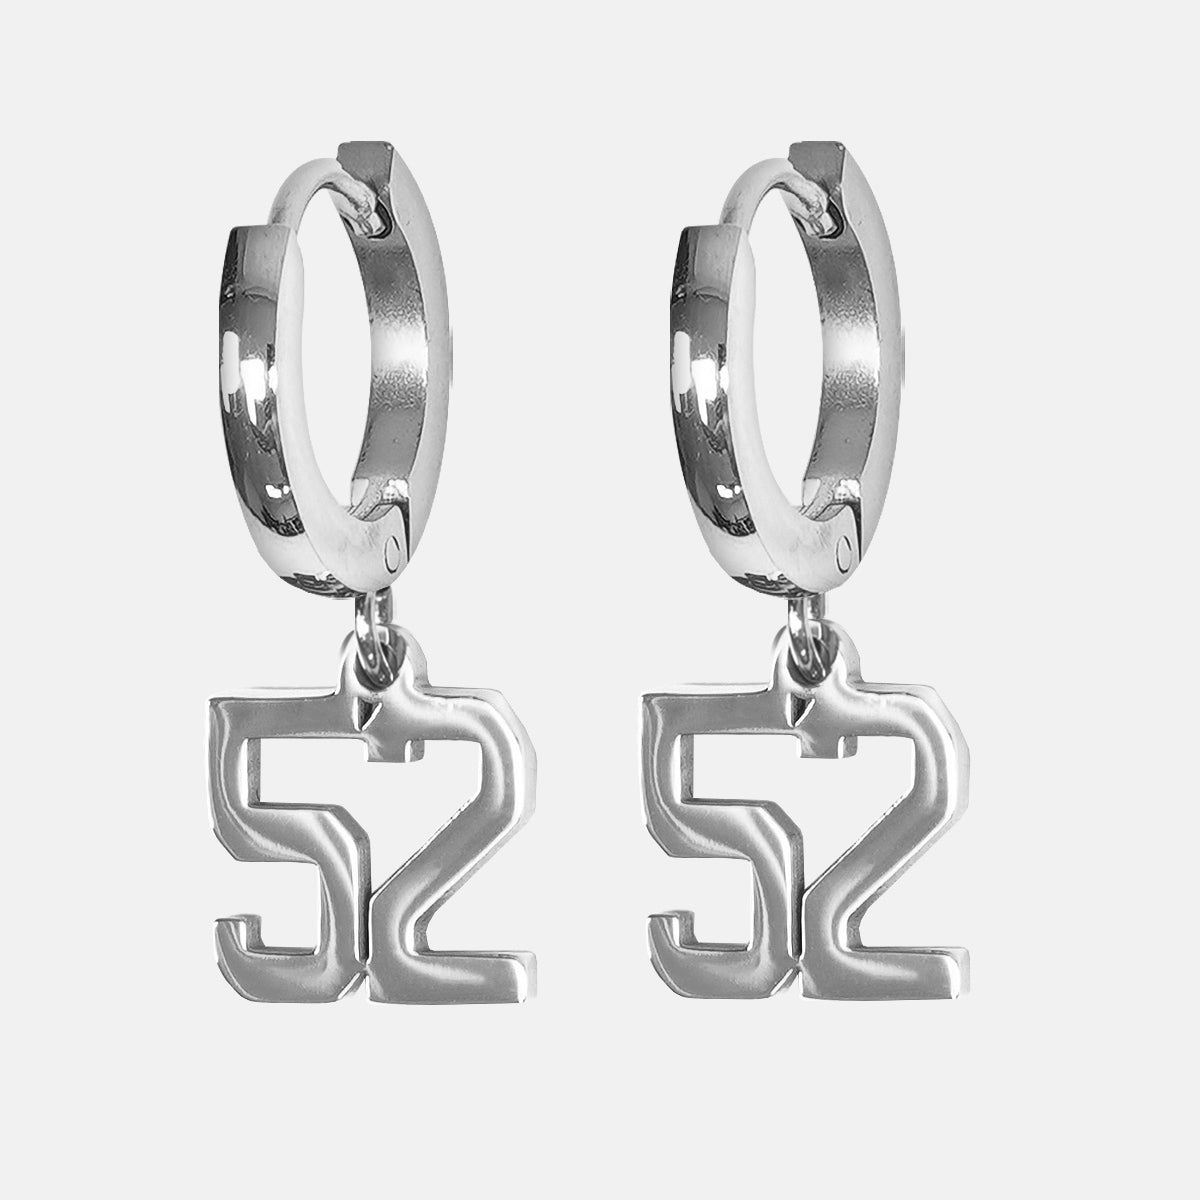 52 Number Earring - Stainless Steel